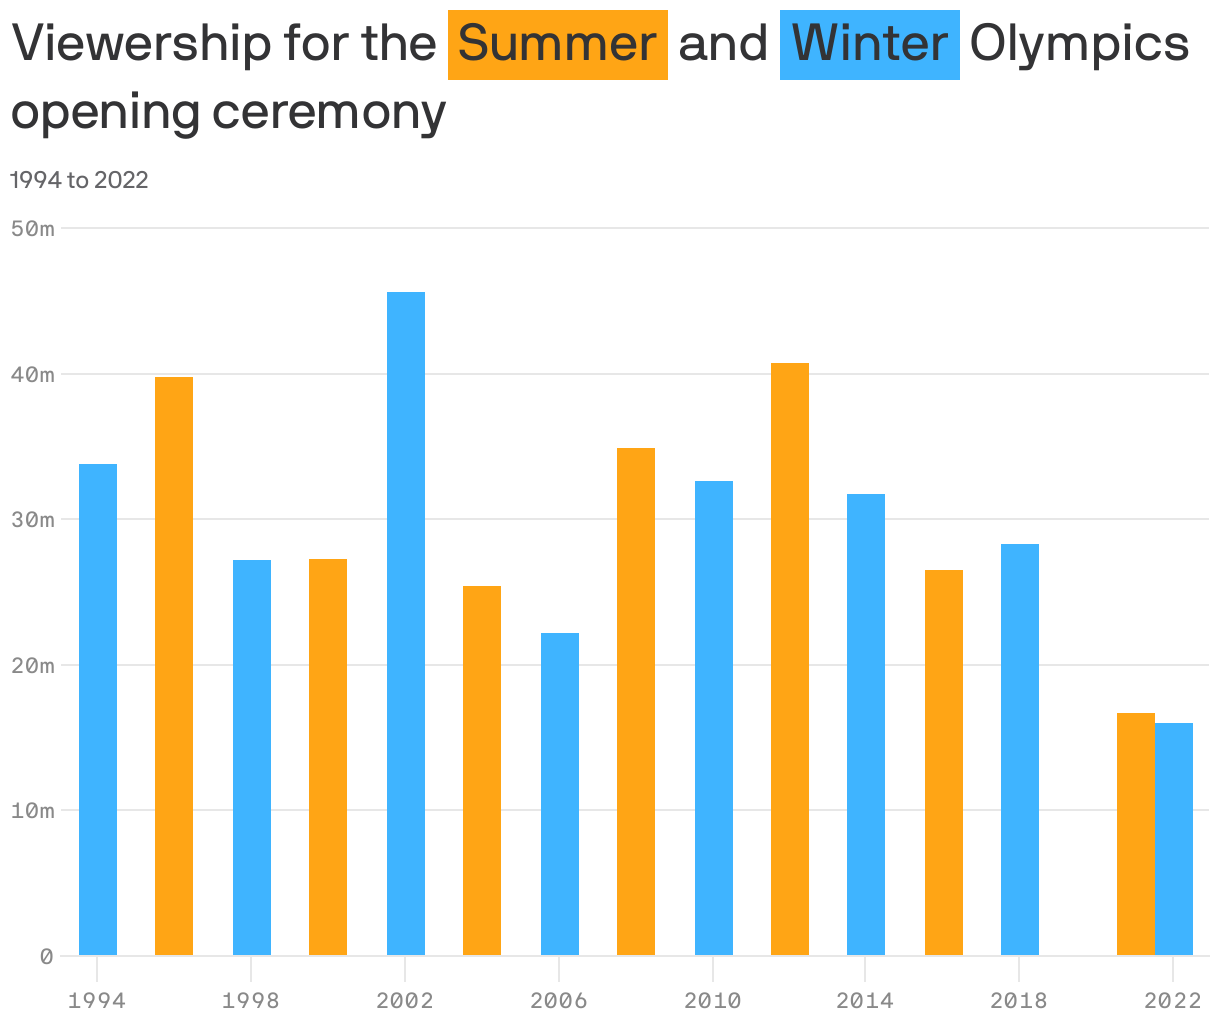 Viewership for the <span style="background:#FFA515; padding: 5px;">Summer</span> and <span style="background:#3FB4FF; padding: 5px;">Winter</span> Olympics opening ceremony